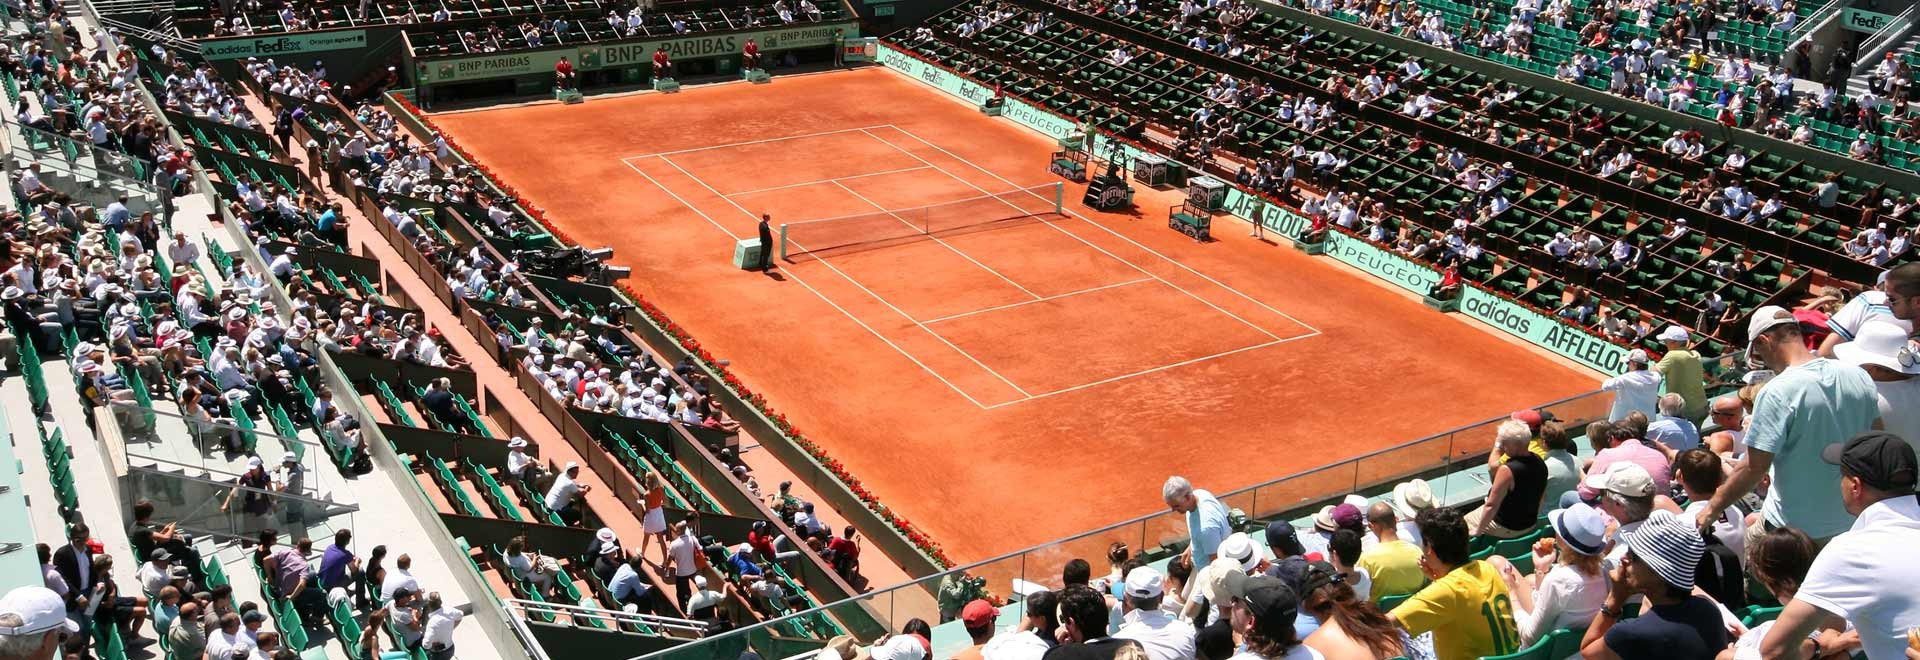 French Open, Paris - Book. Travel. Play.